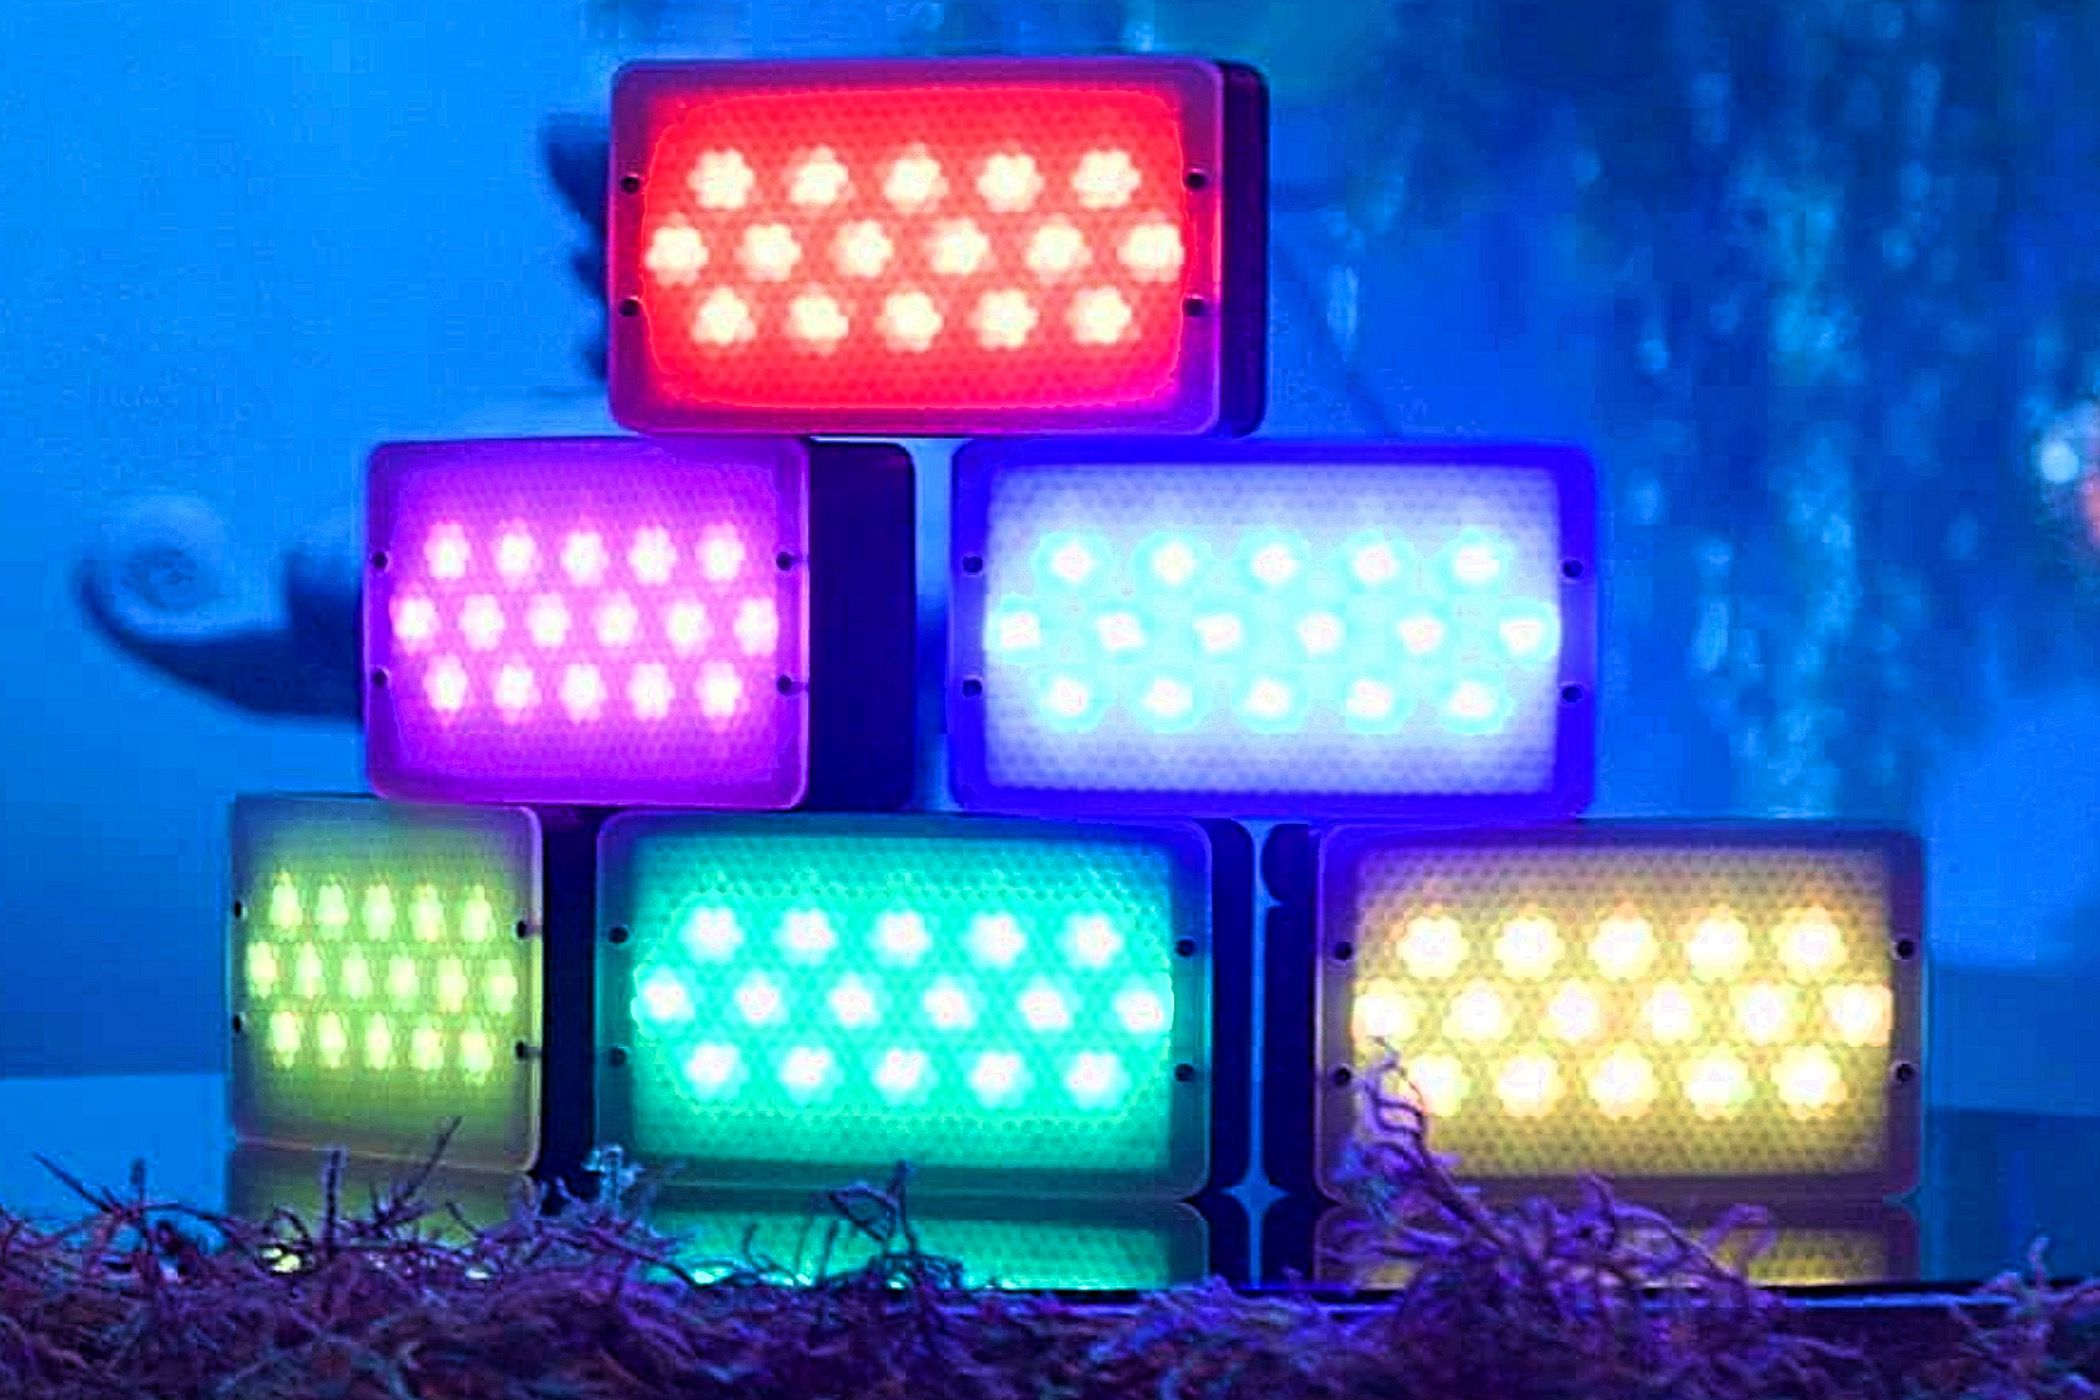 Several Aputure MC Pro lights built on top of each other and displaying different colors.